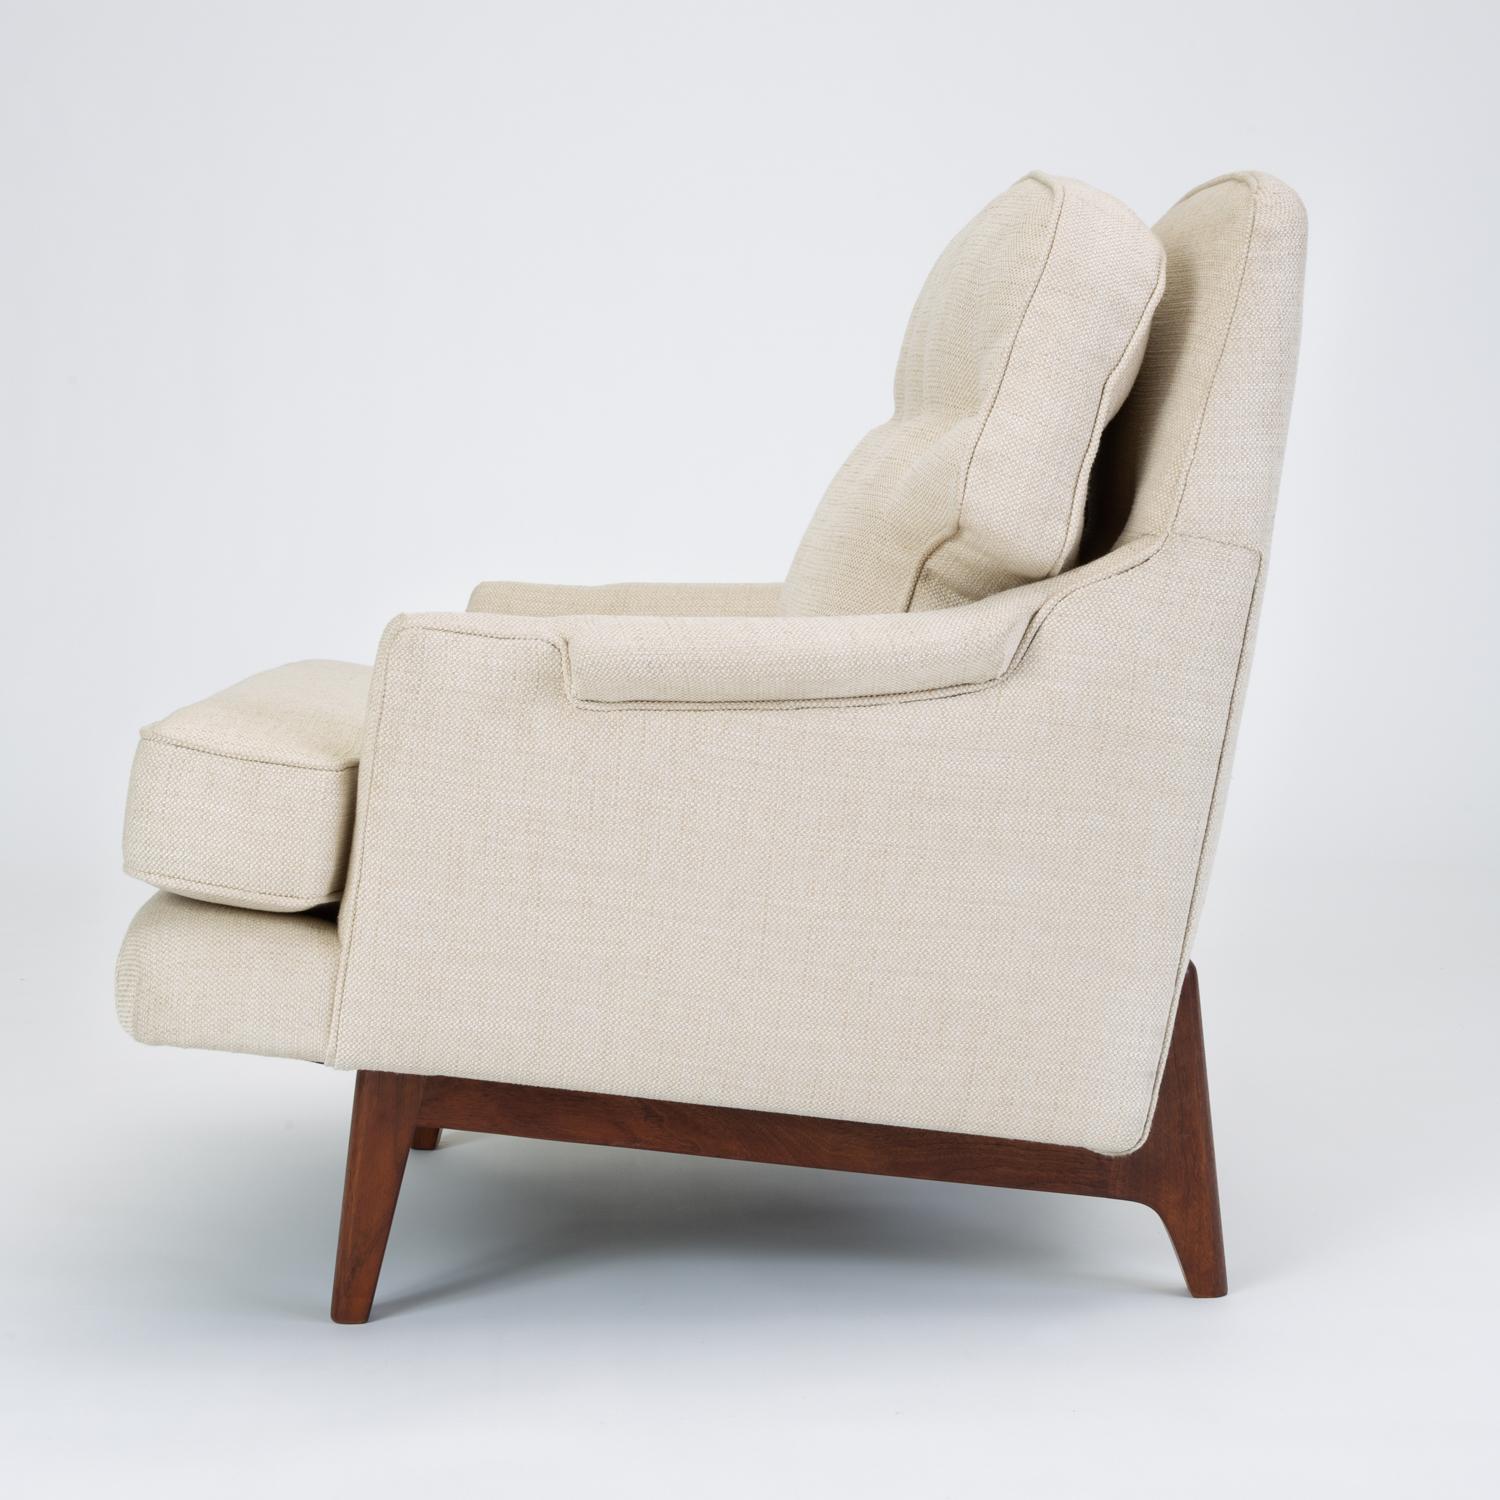 Mid-20th Century Lounge Chair with Bracket Base by Roger Sprunger for Dunbar